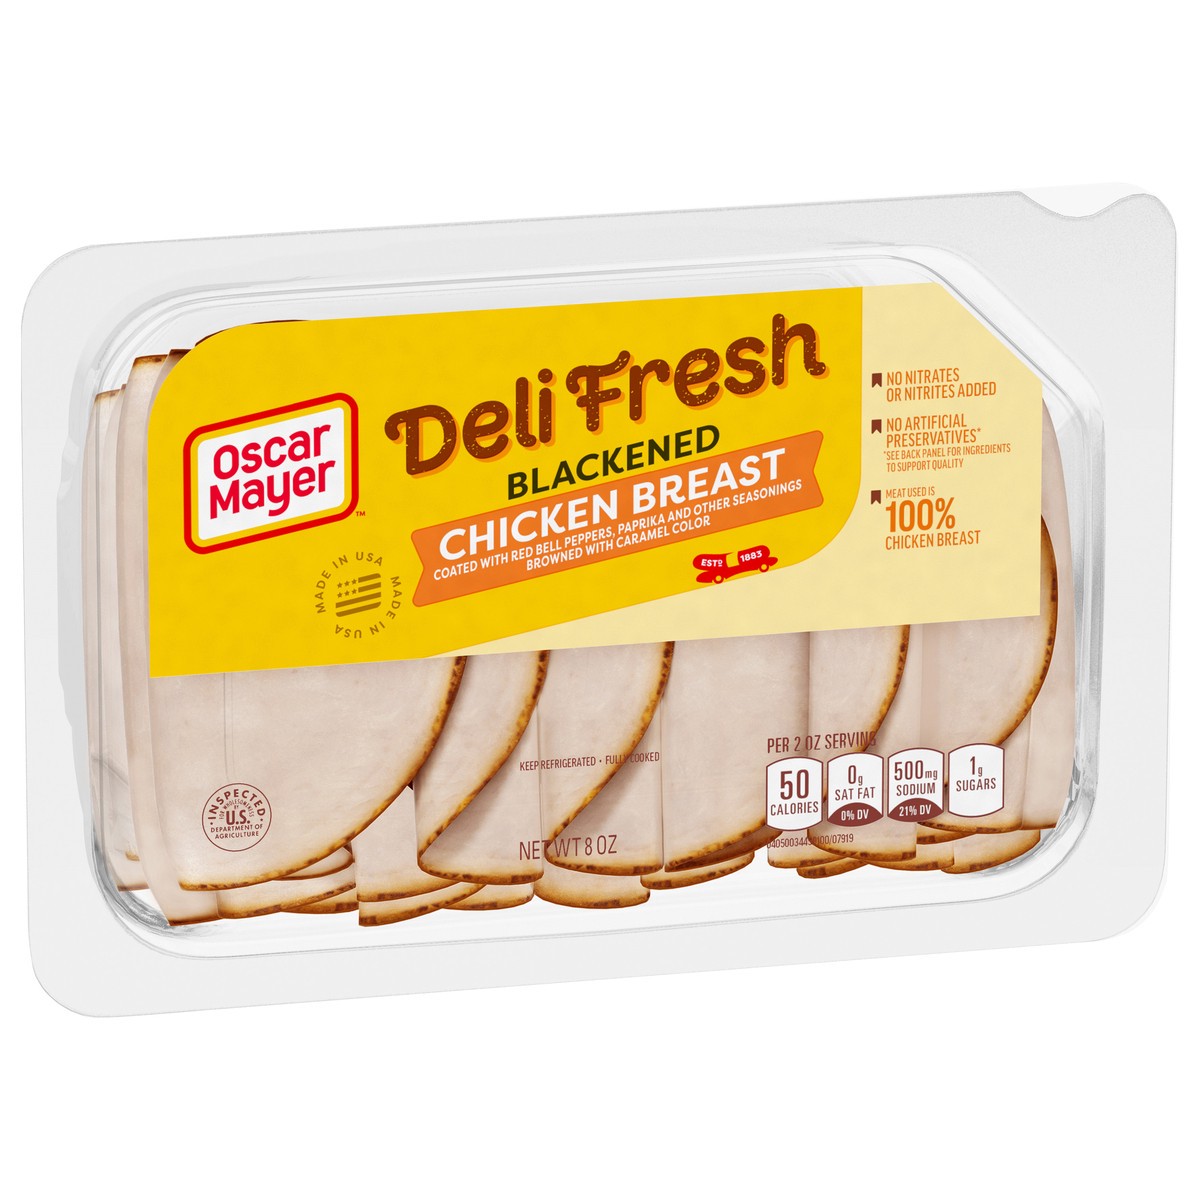 slide 4 of 9, Oscar Mayer Deli Fresh Blackened Chicken Breast Coated with Red Bell Pepper, Paprika and other Seasonings Browned with Caramel Color Sliced Lunch Meat, 8 oz. Tray, 8 oz